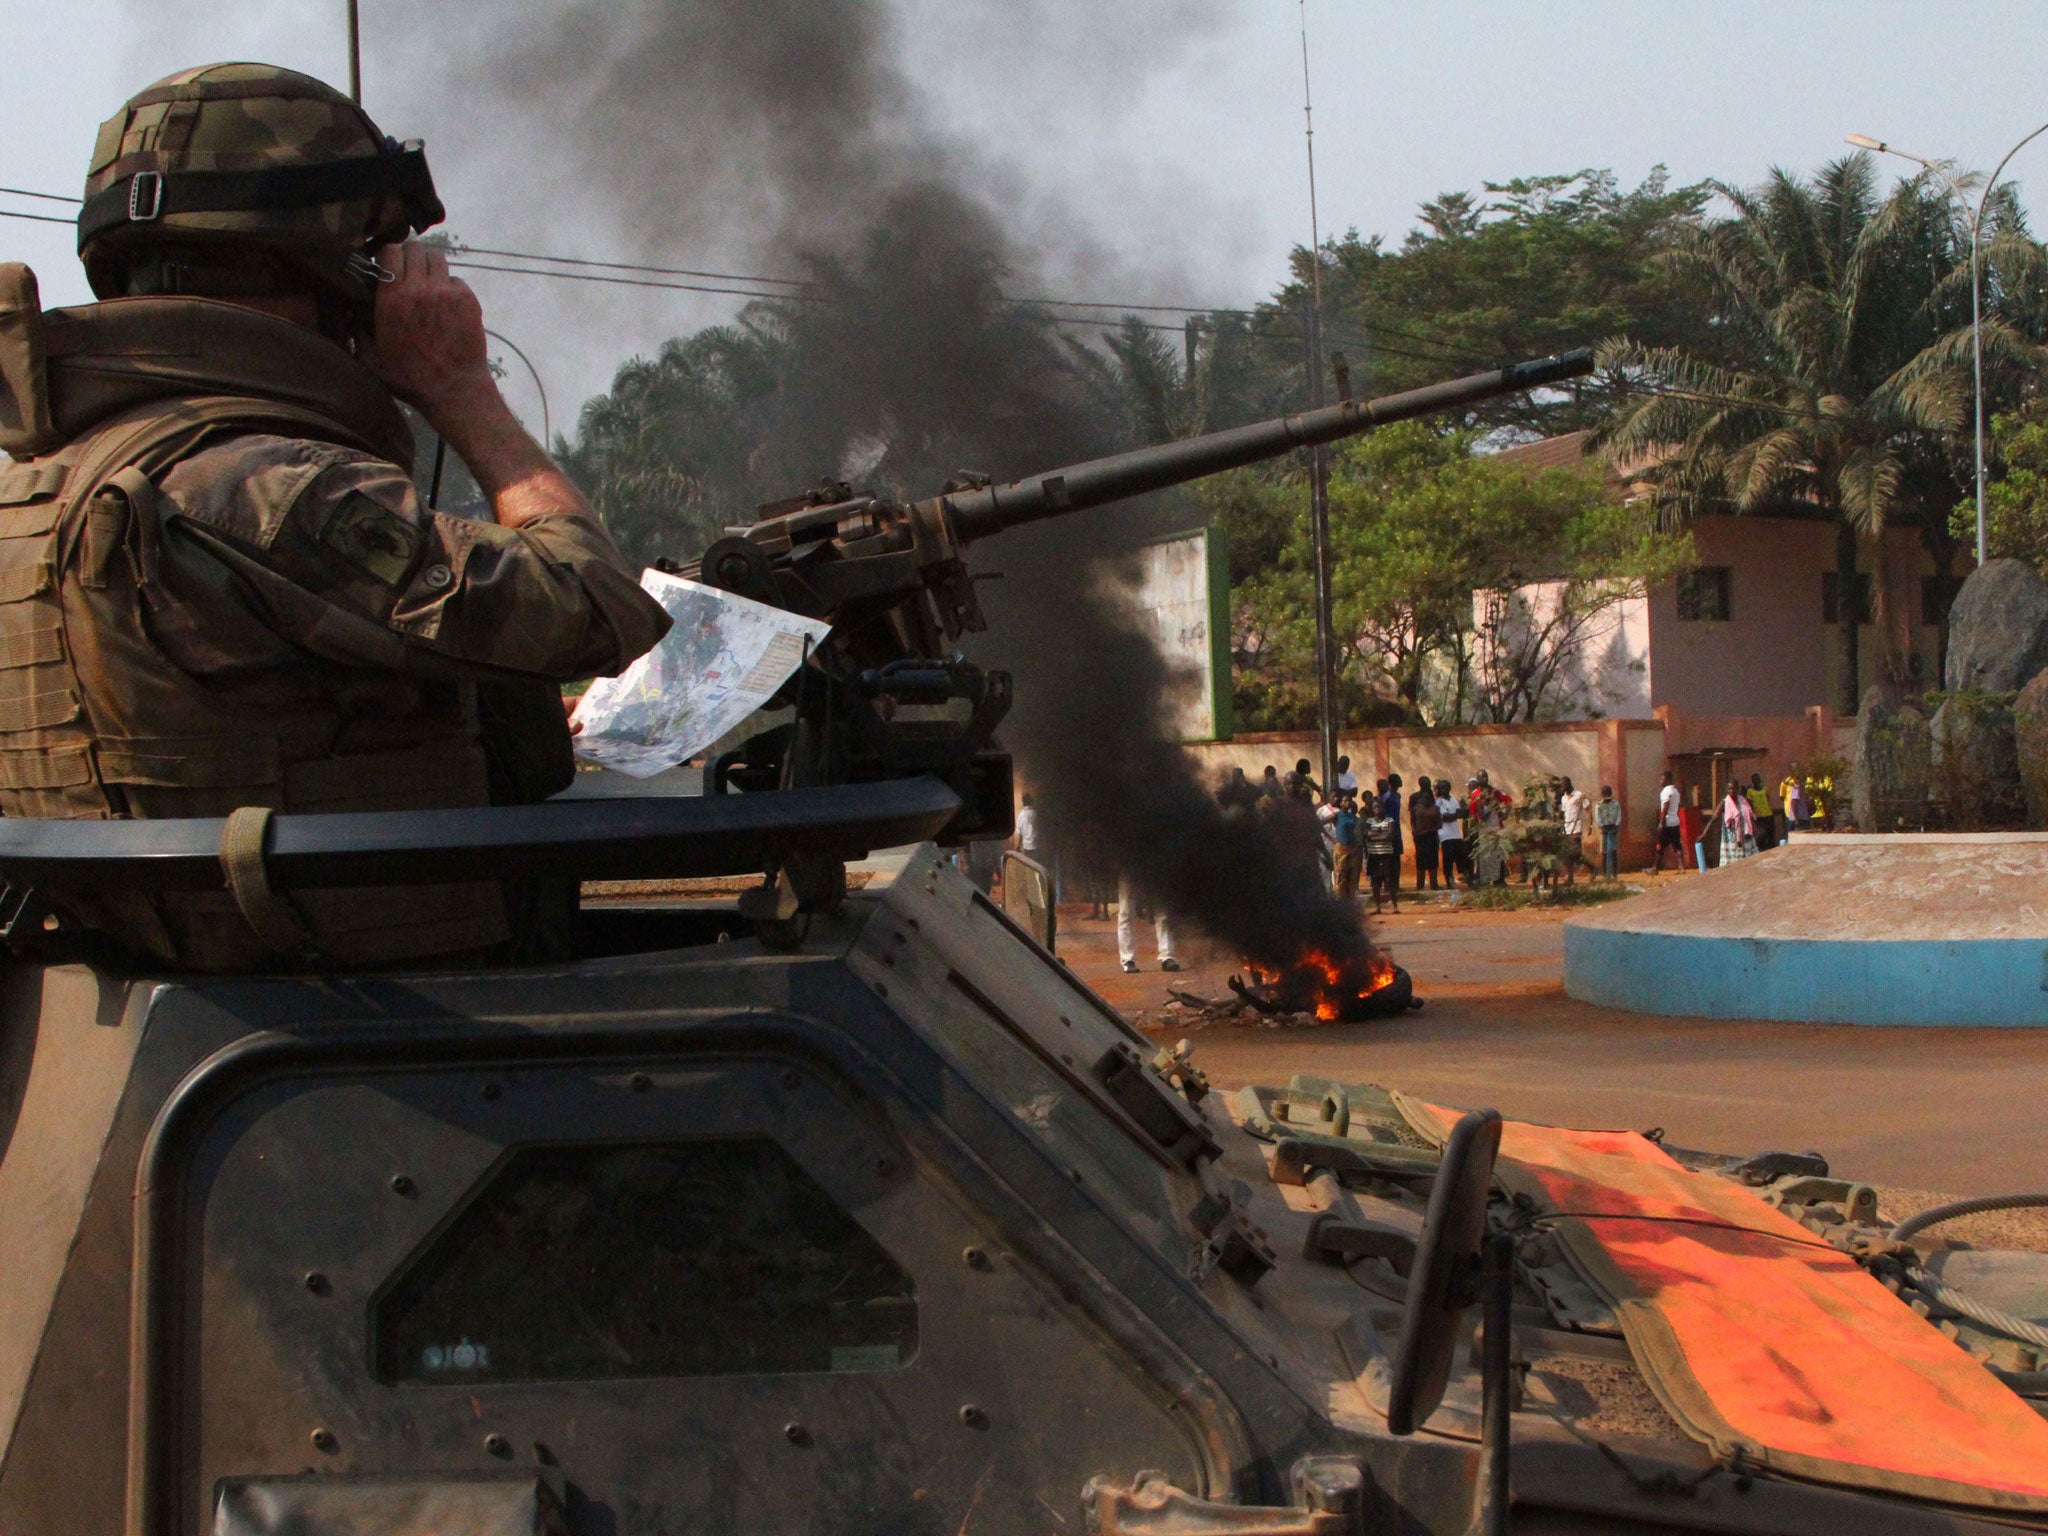 A French soldier looks on as the body of a lynched Muslim man is burned by a crowd, in Bangui; the EU has decided to send out troops to help stabilise the country